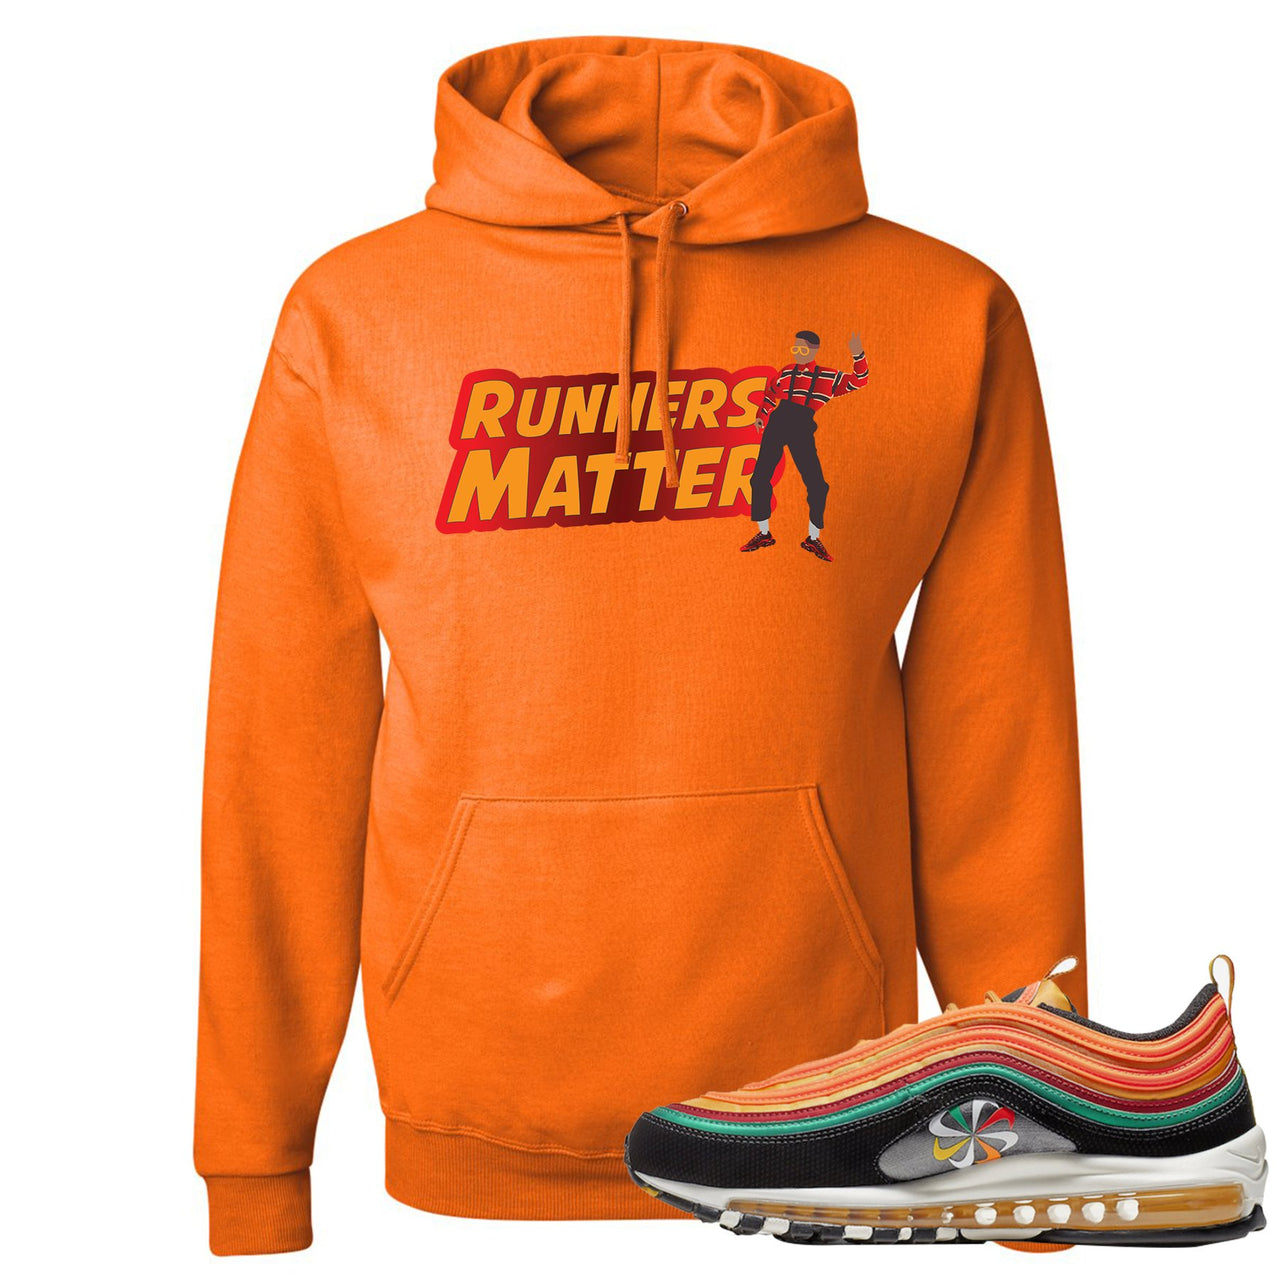 Printed on the front of the Air Max 97 Sunburst safety orange sneaker matching pullover hoodie is the Runners Matter logo